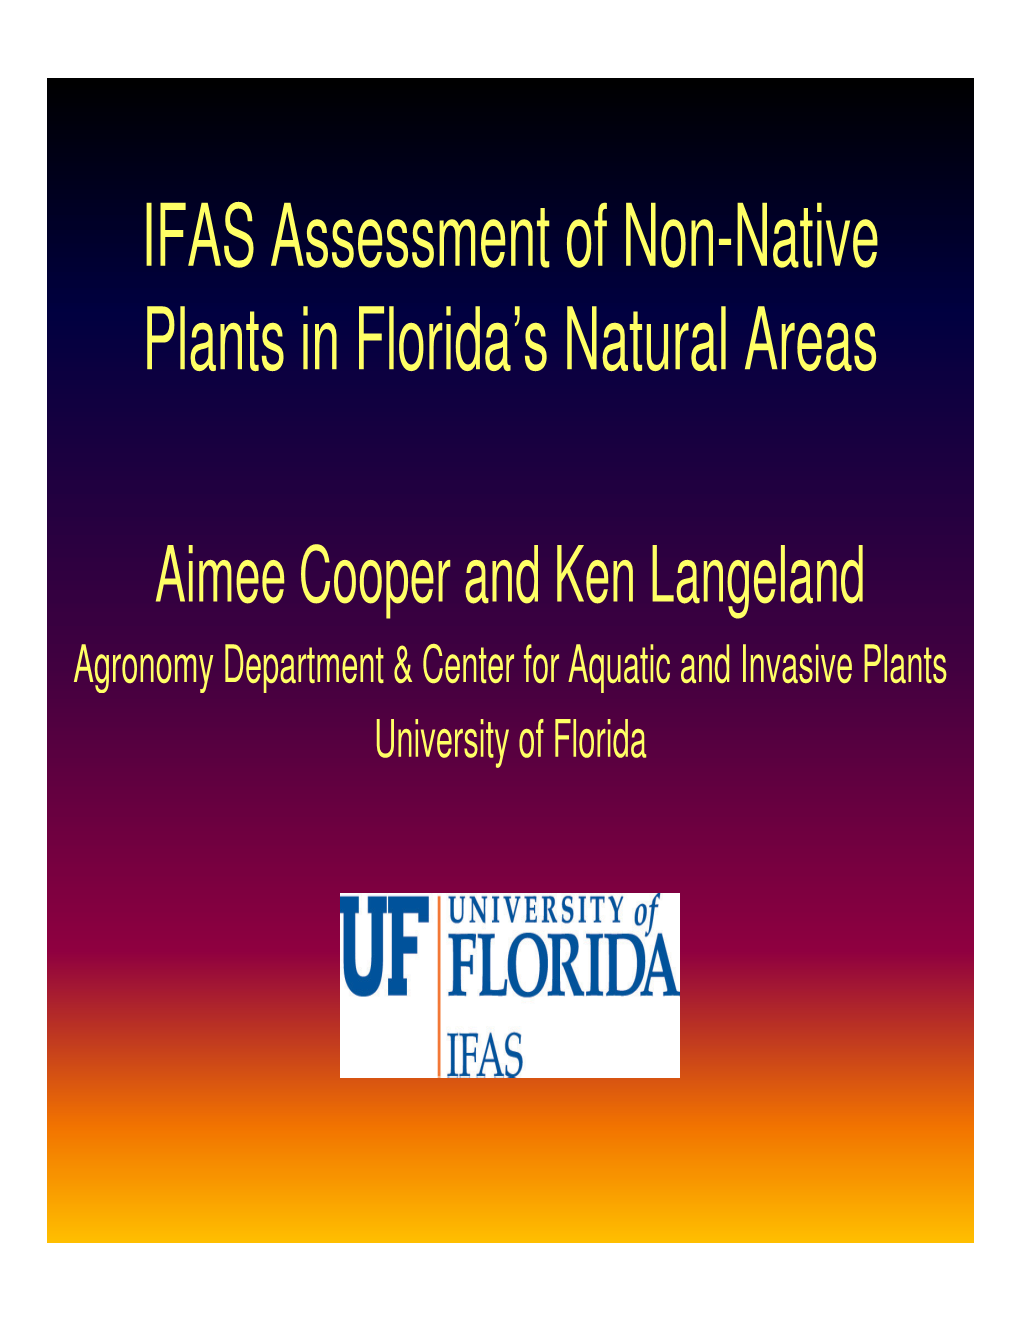 IFAS Assessment of Non-Native Plants in Florida's Natural Areas